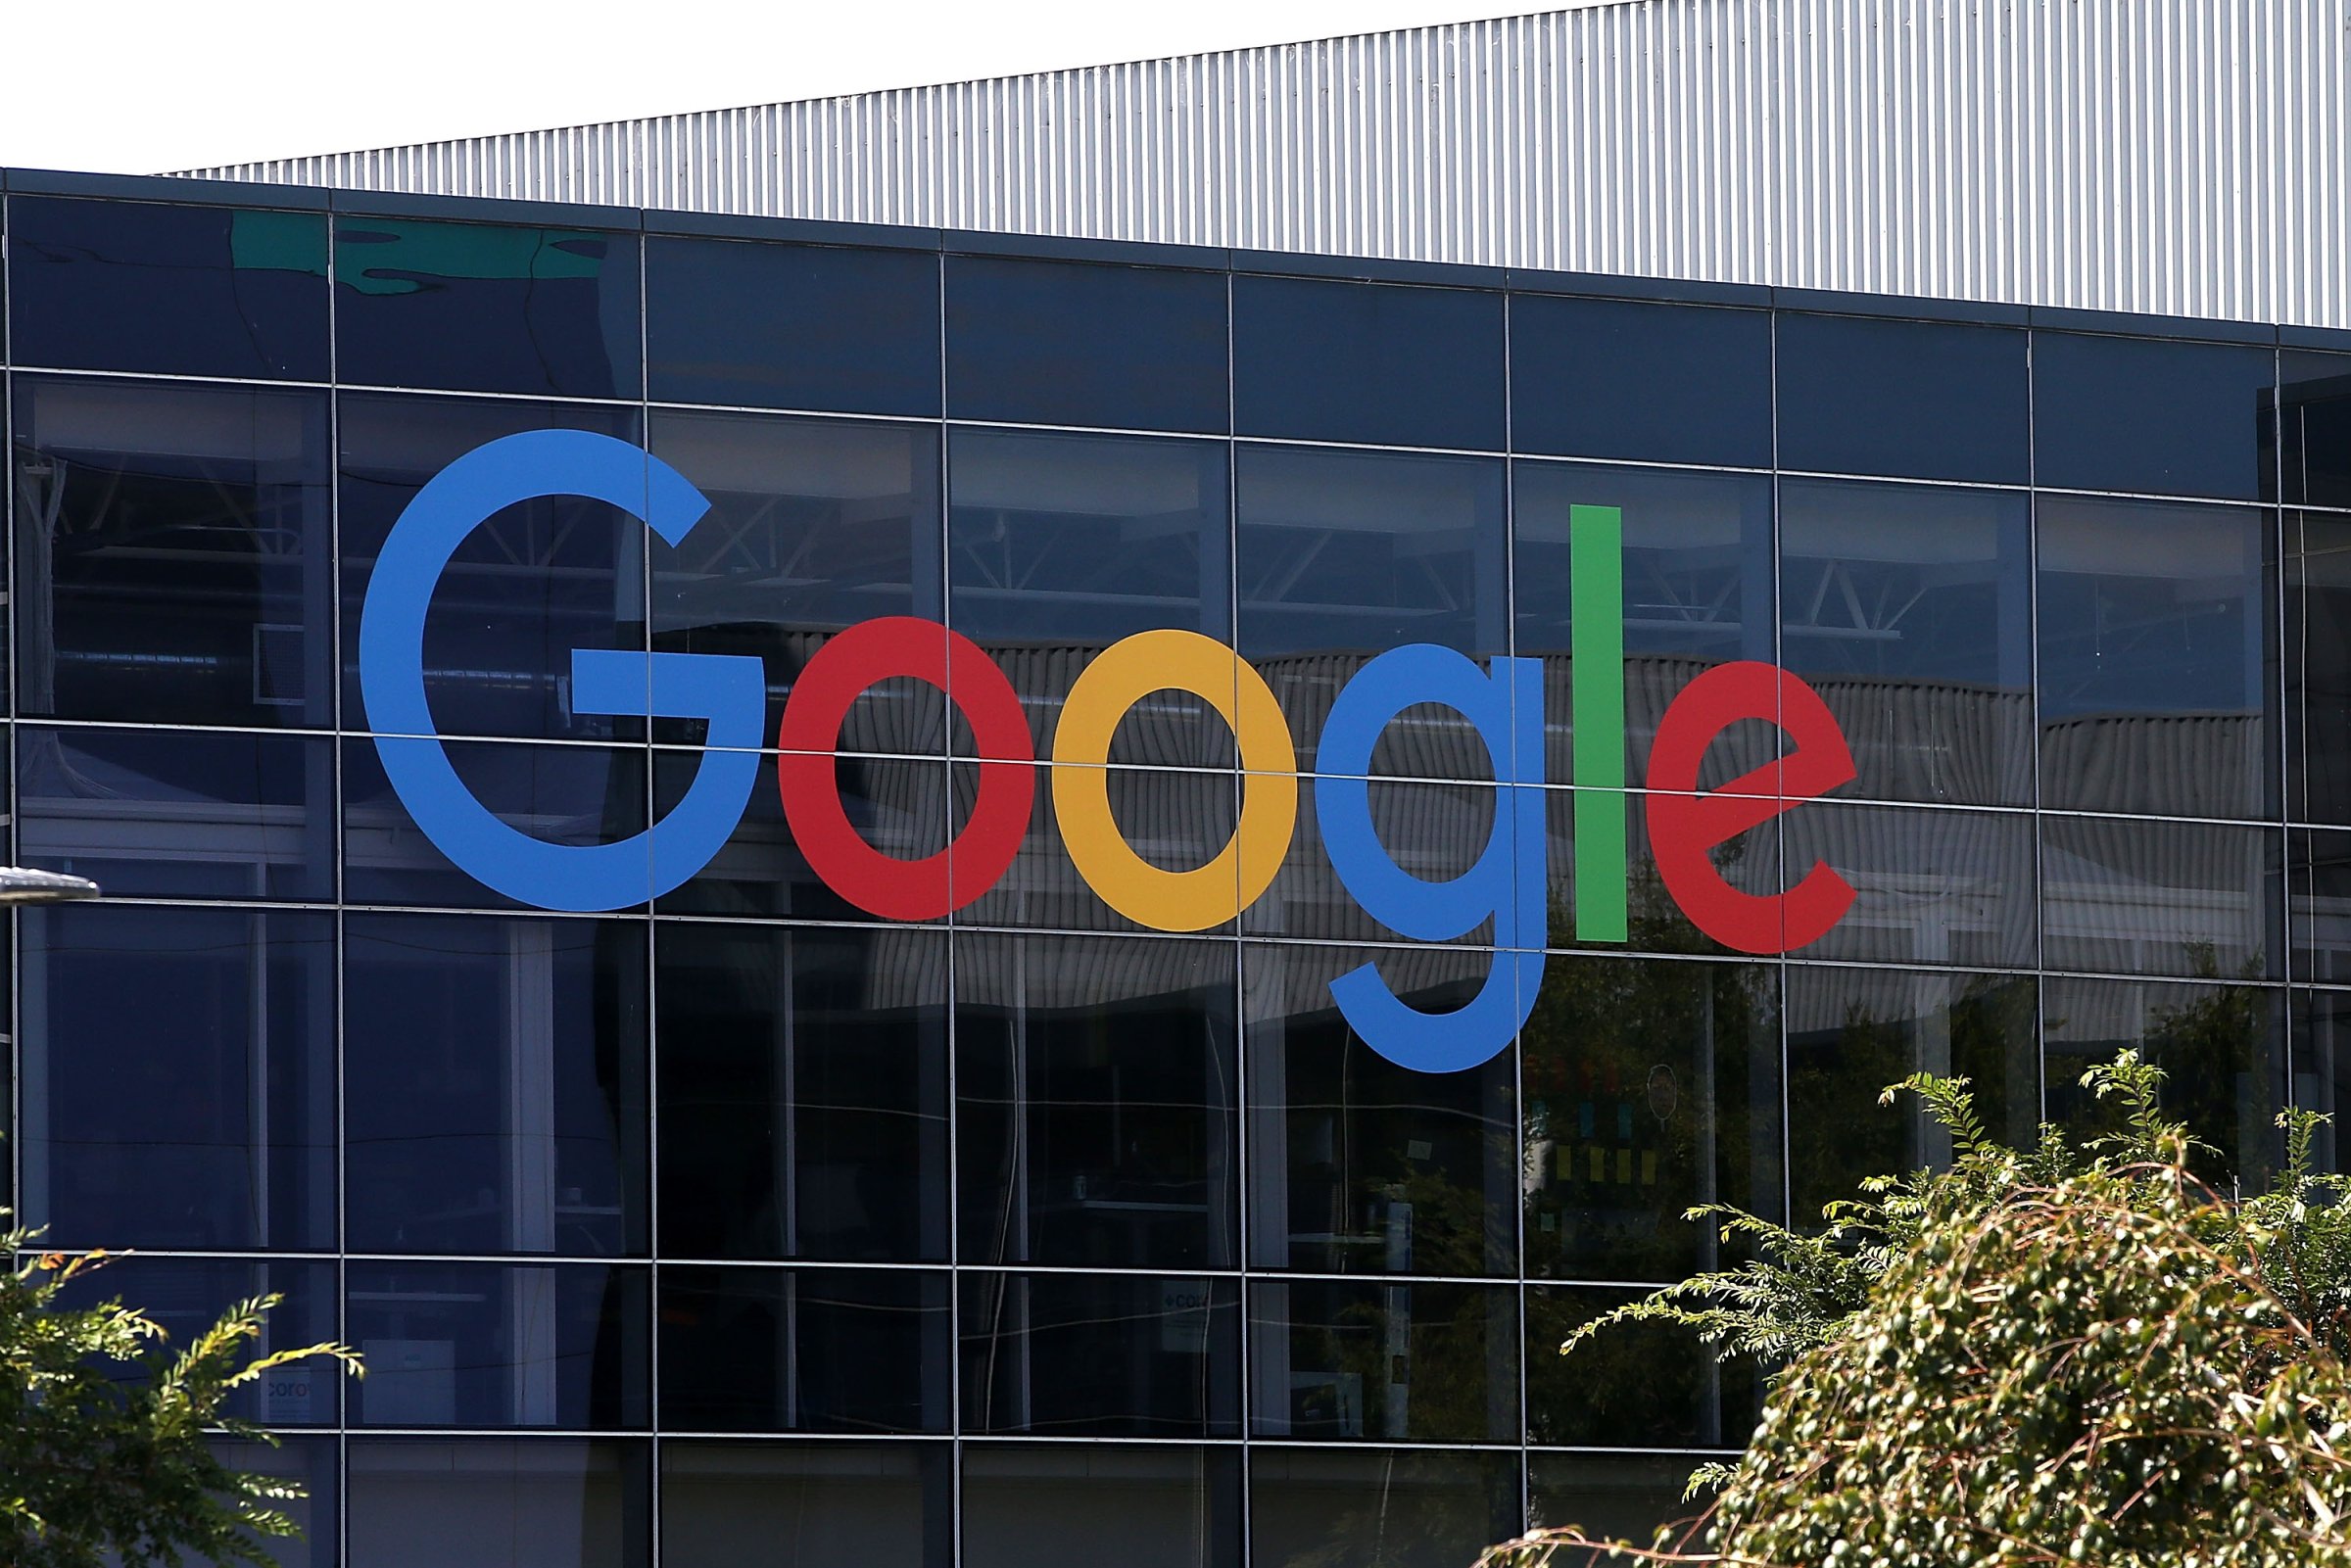 The Google logo is displayed at the Google headquarters on Sept. 2, 2015 in Mountain View, Calif.